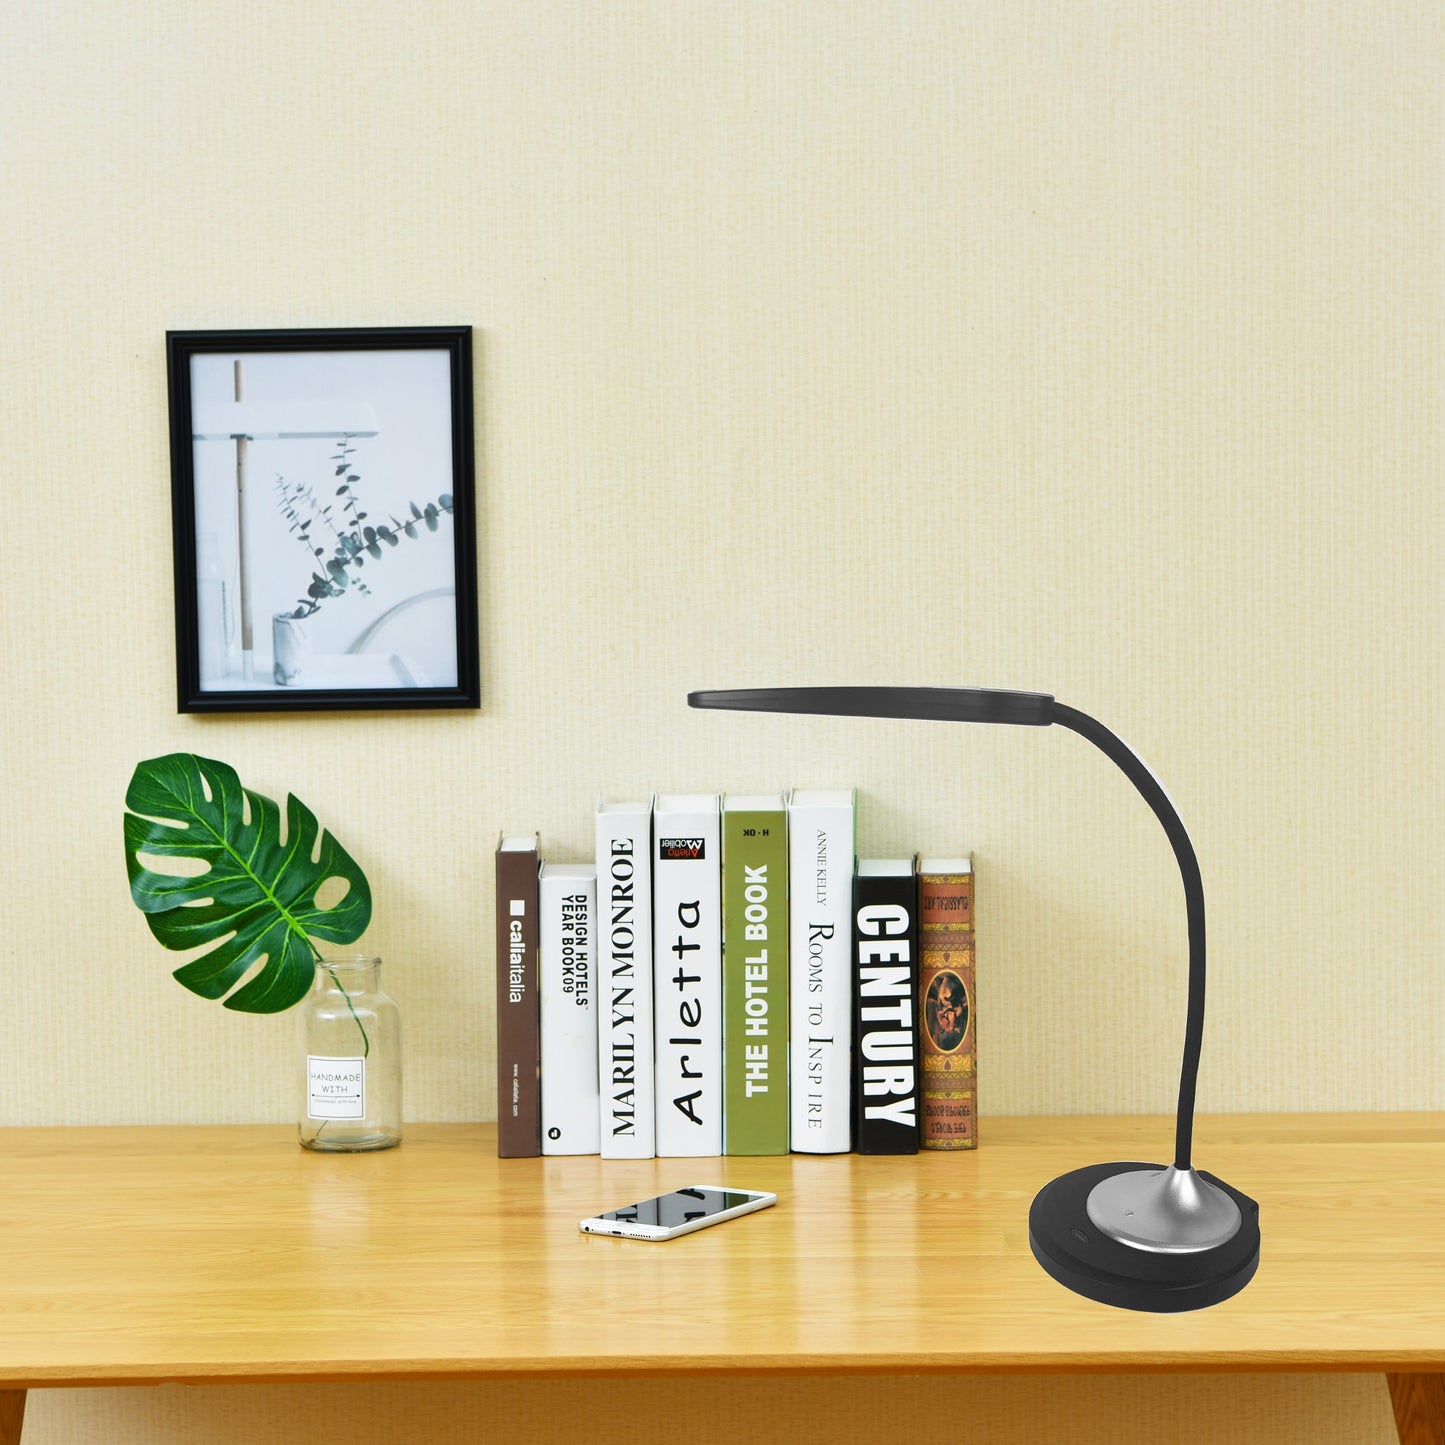 DAC® MP-354 Adjustable LED Desk Lamp/Table Lamp with USB Charging Port, Silver and Black